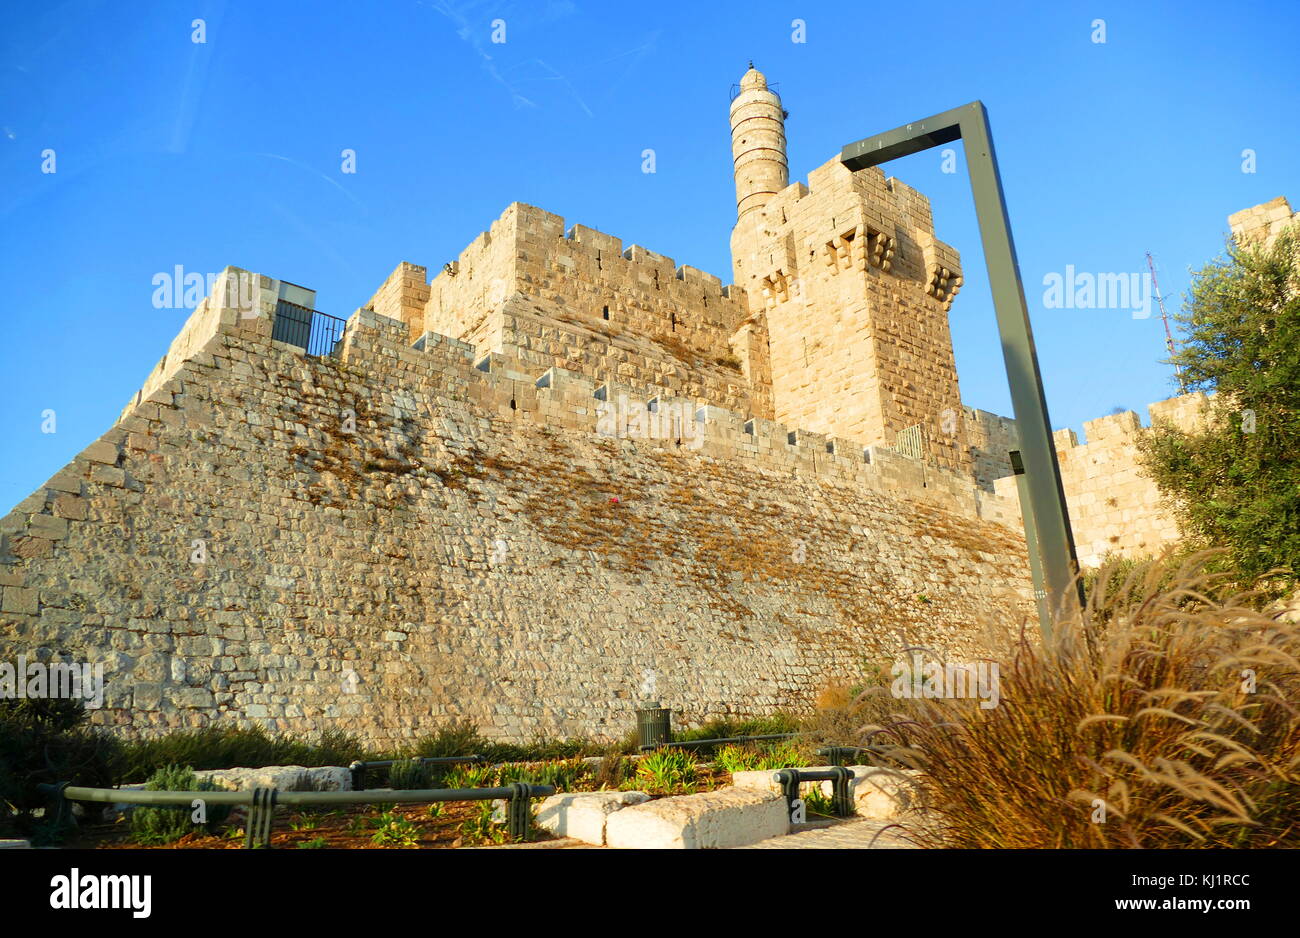 The Tower of David (Migdal David, Burj Daud), known as the Jerusalem Citadel, is an ancient citadel located near the Jaffa Gate entrance to western edge of the Old City of Jerusalem. The citadel that stands today dates to the Mamluk and Ottoman periods. It was built on the site of an earlier ancient fortification of the Hasmonean, Herodian-era, Byzantine and Early Muslim periods, after being destroyed repeatedly during the last decades of Crusader presence in the Holy Land by Ayyubid and Mamluk rulers. Stock Photo